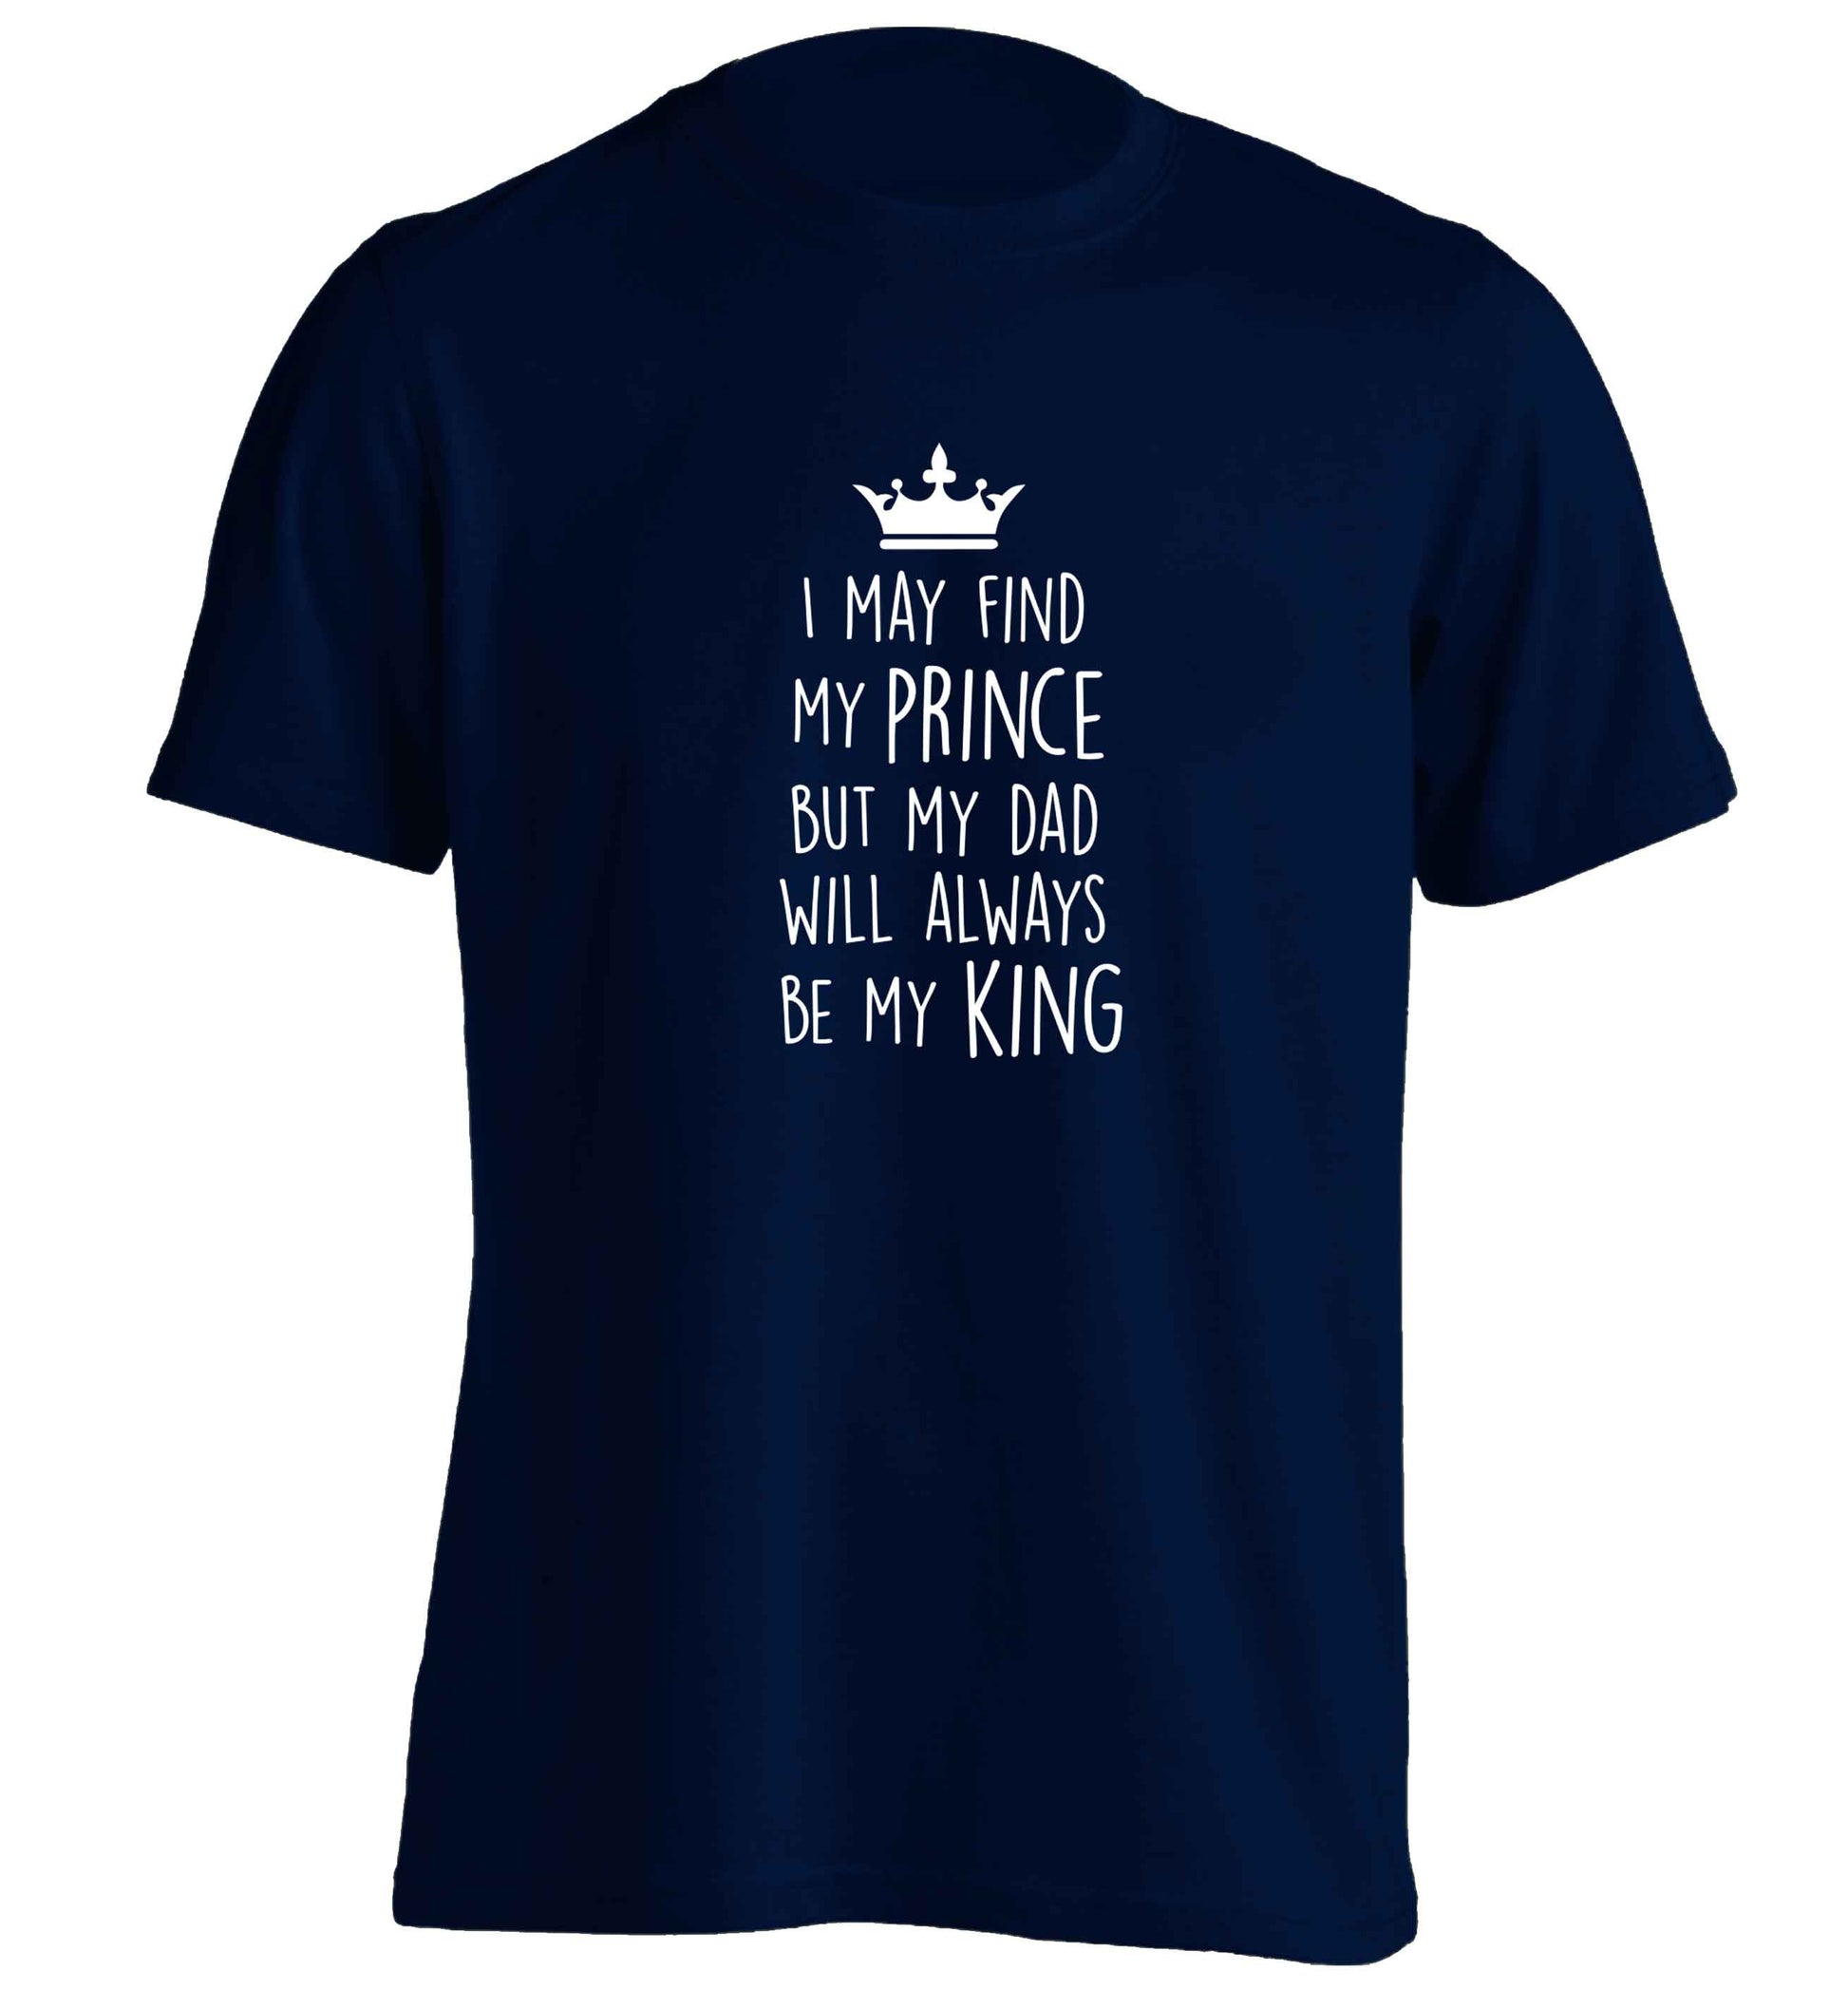 I may find my prince but my dad will always be my king adults unisex navy Tshirt 2XL